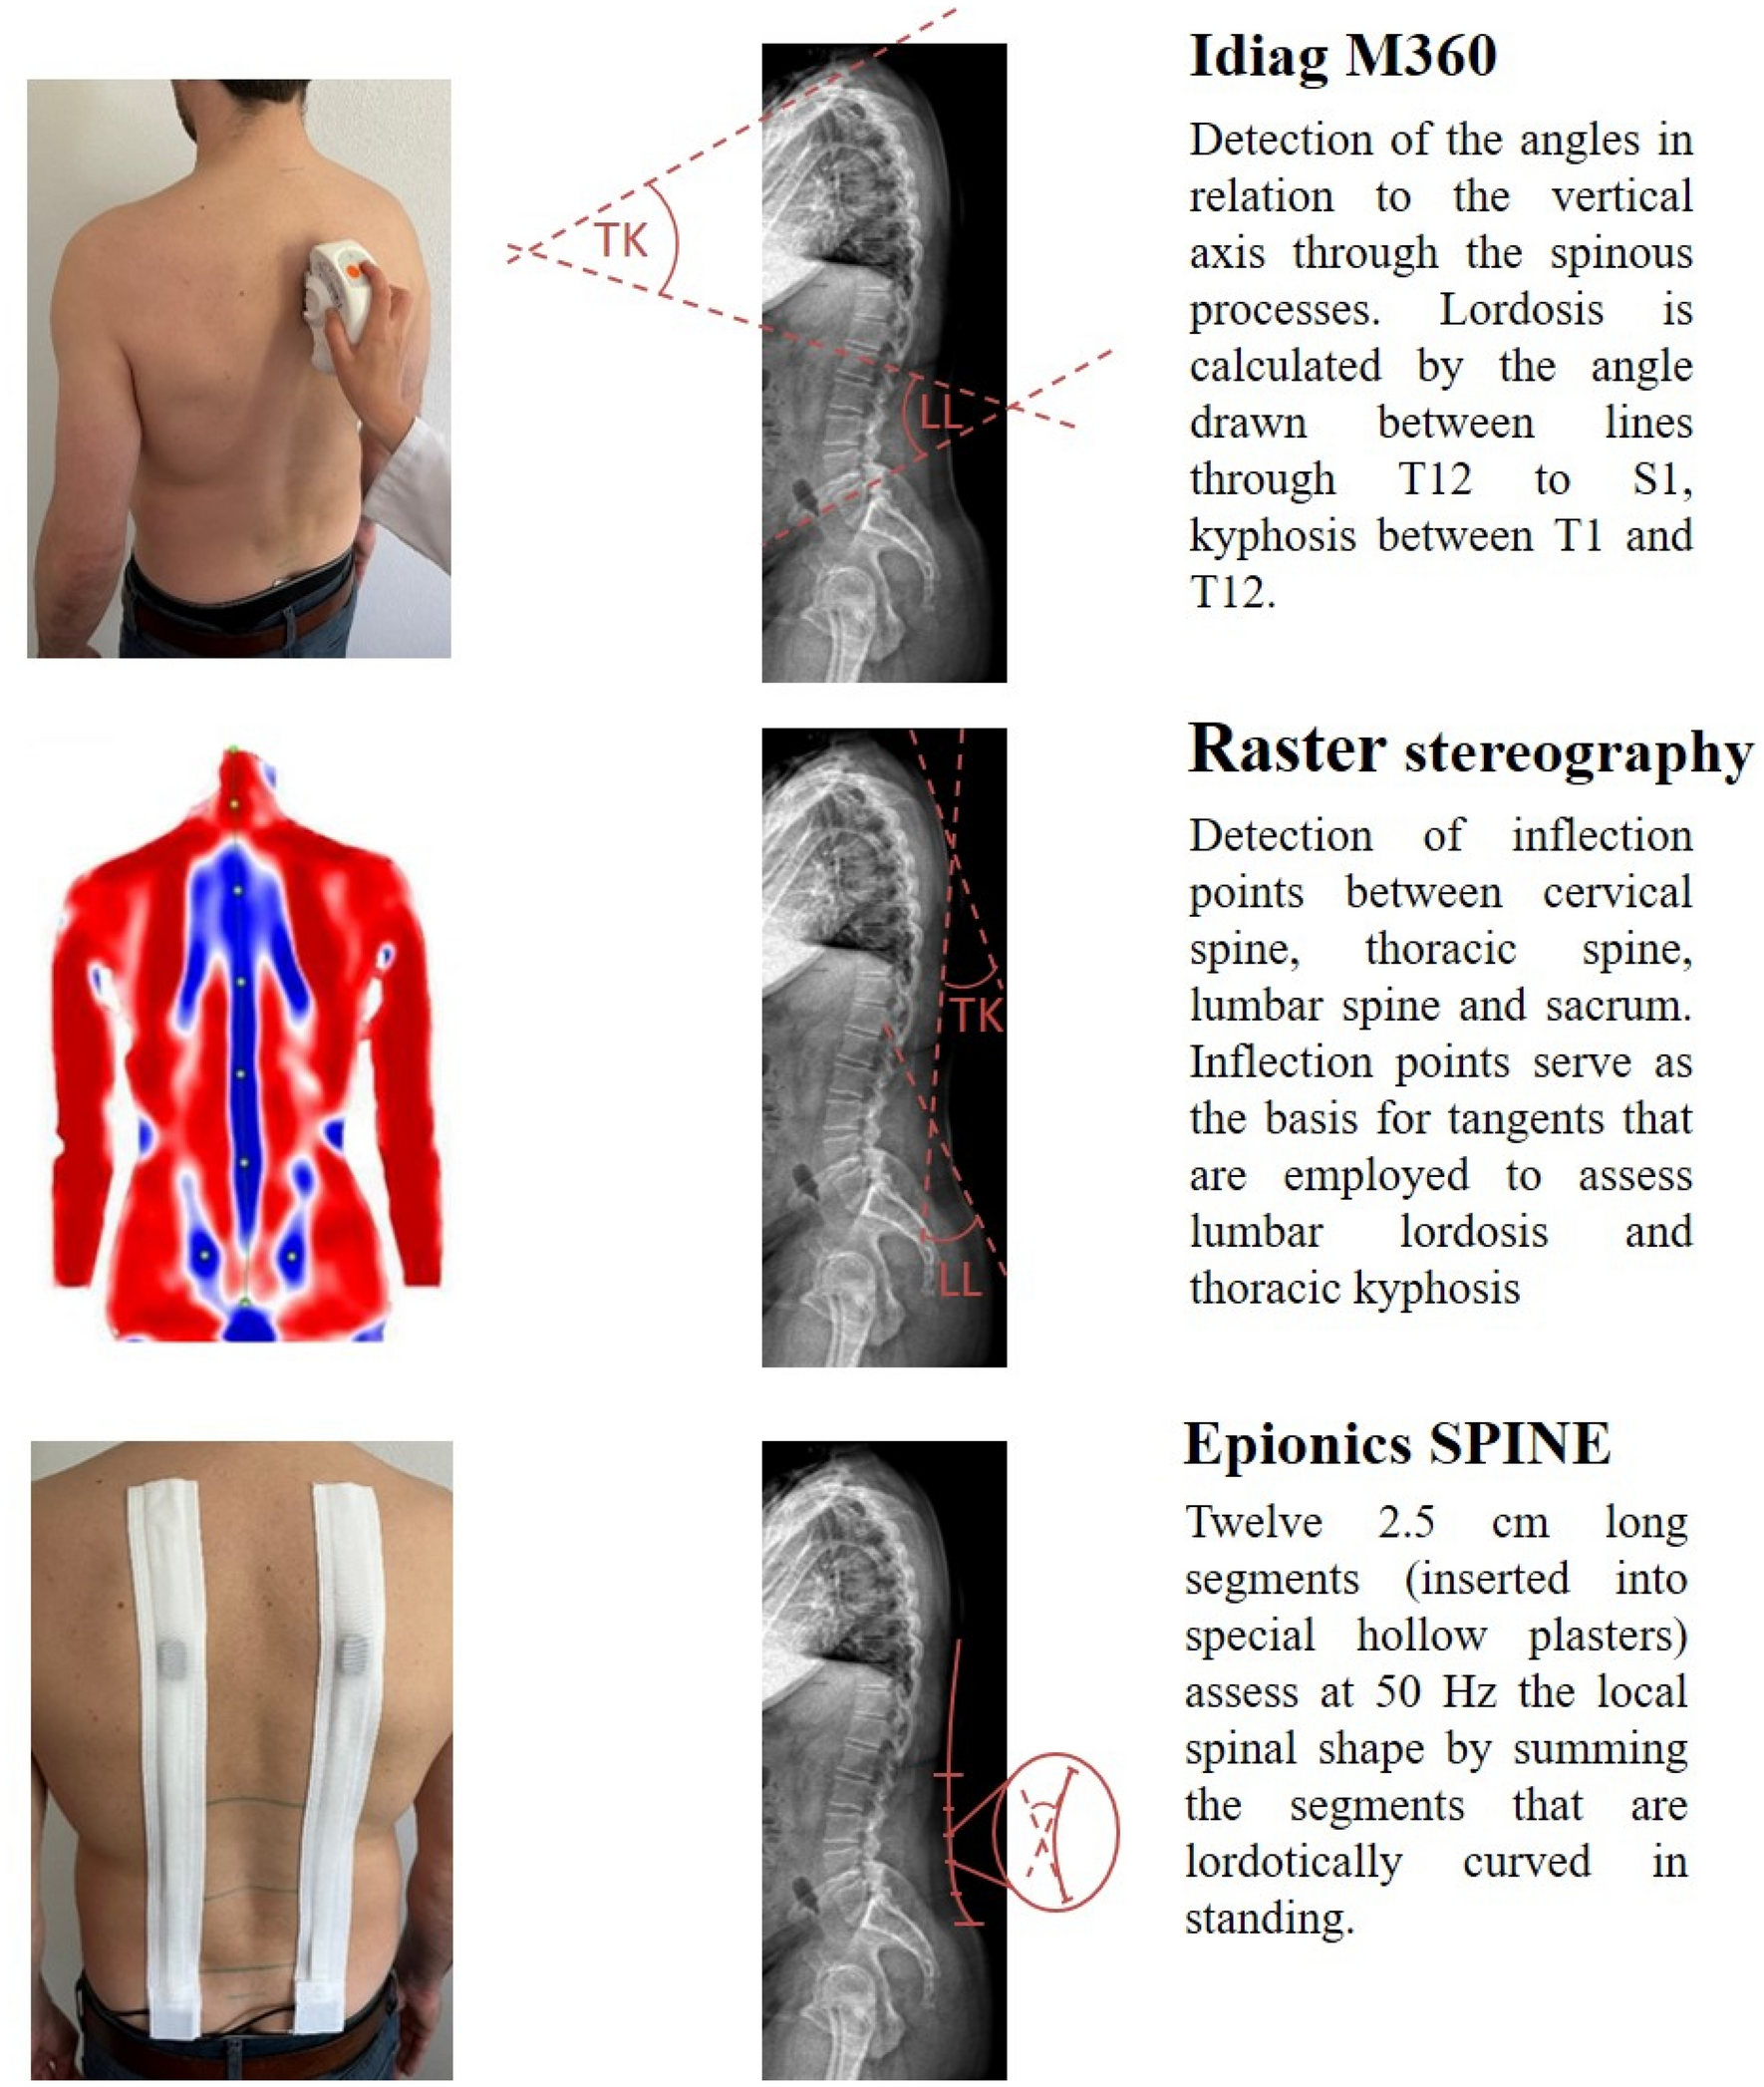 Comparison of three validated systems to analyse spinal shape and motion